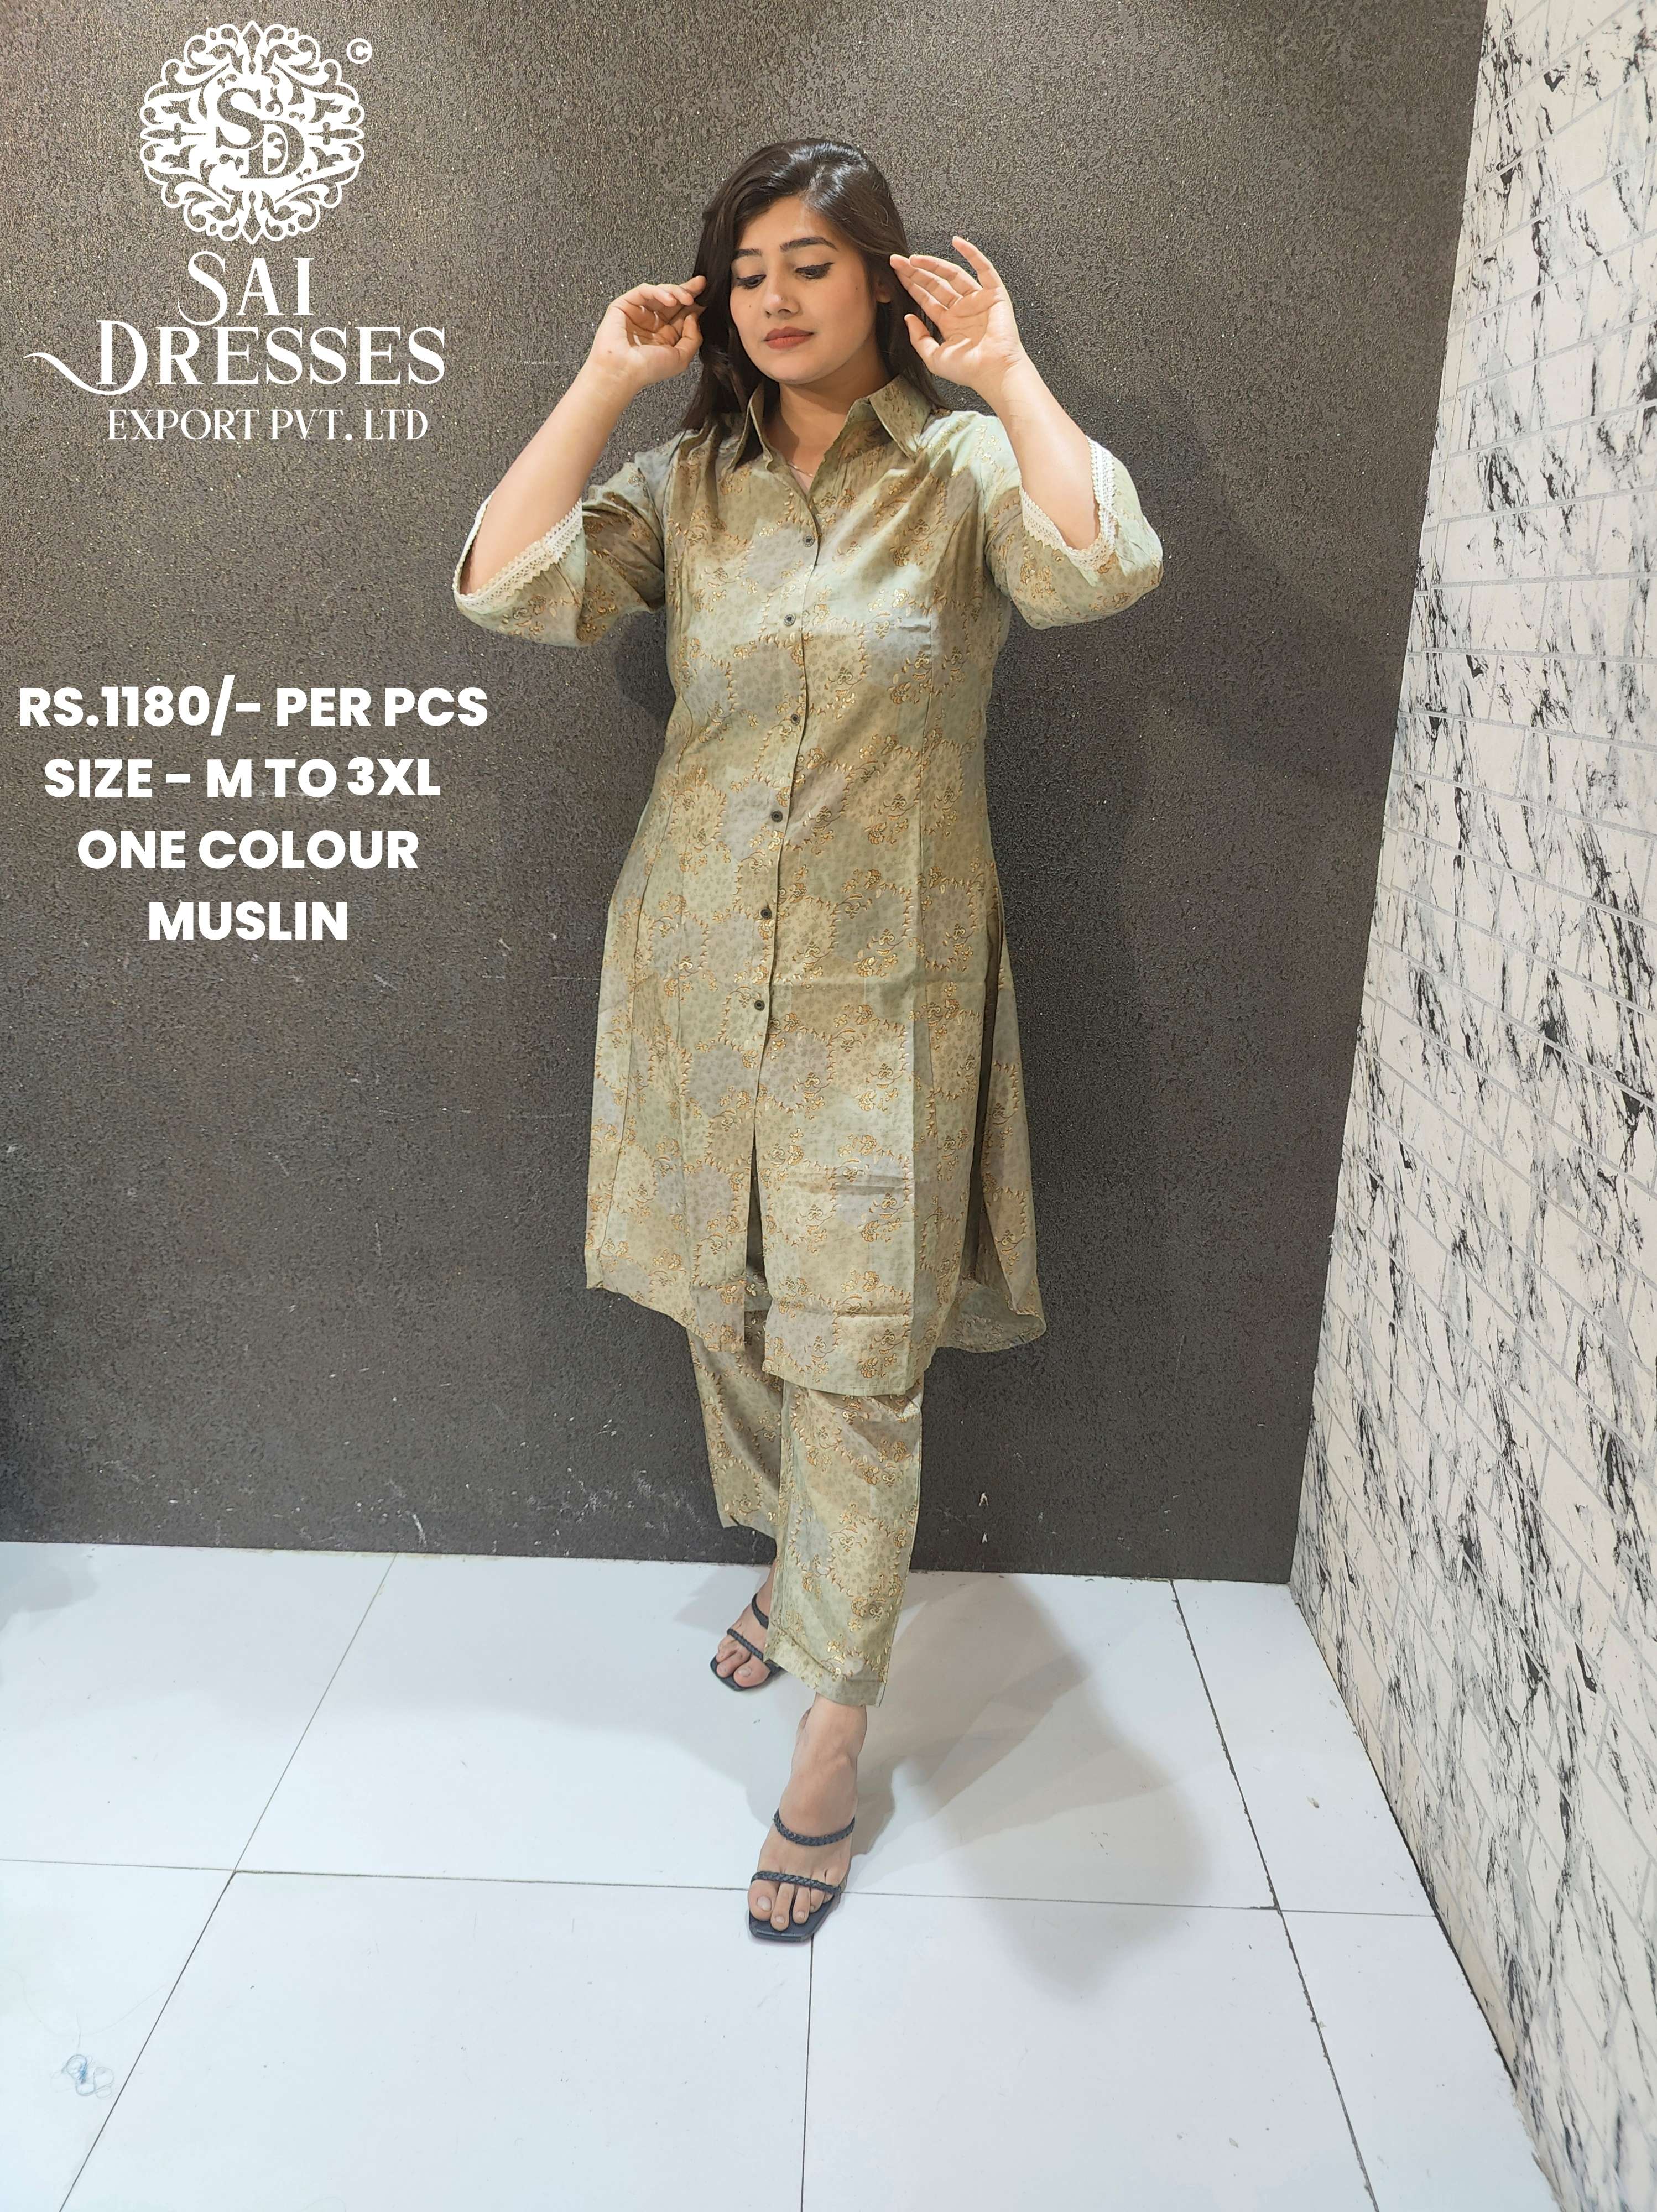 SAI DRESSES PRESENT D.NO 909 READY TO EXCLUSIVE TRENDY WEAR PATHANI STYLE CO-ORD SET COMBO COLLECTION IN WHOLESALE RATE IN SURAT